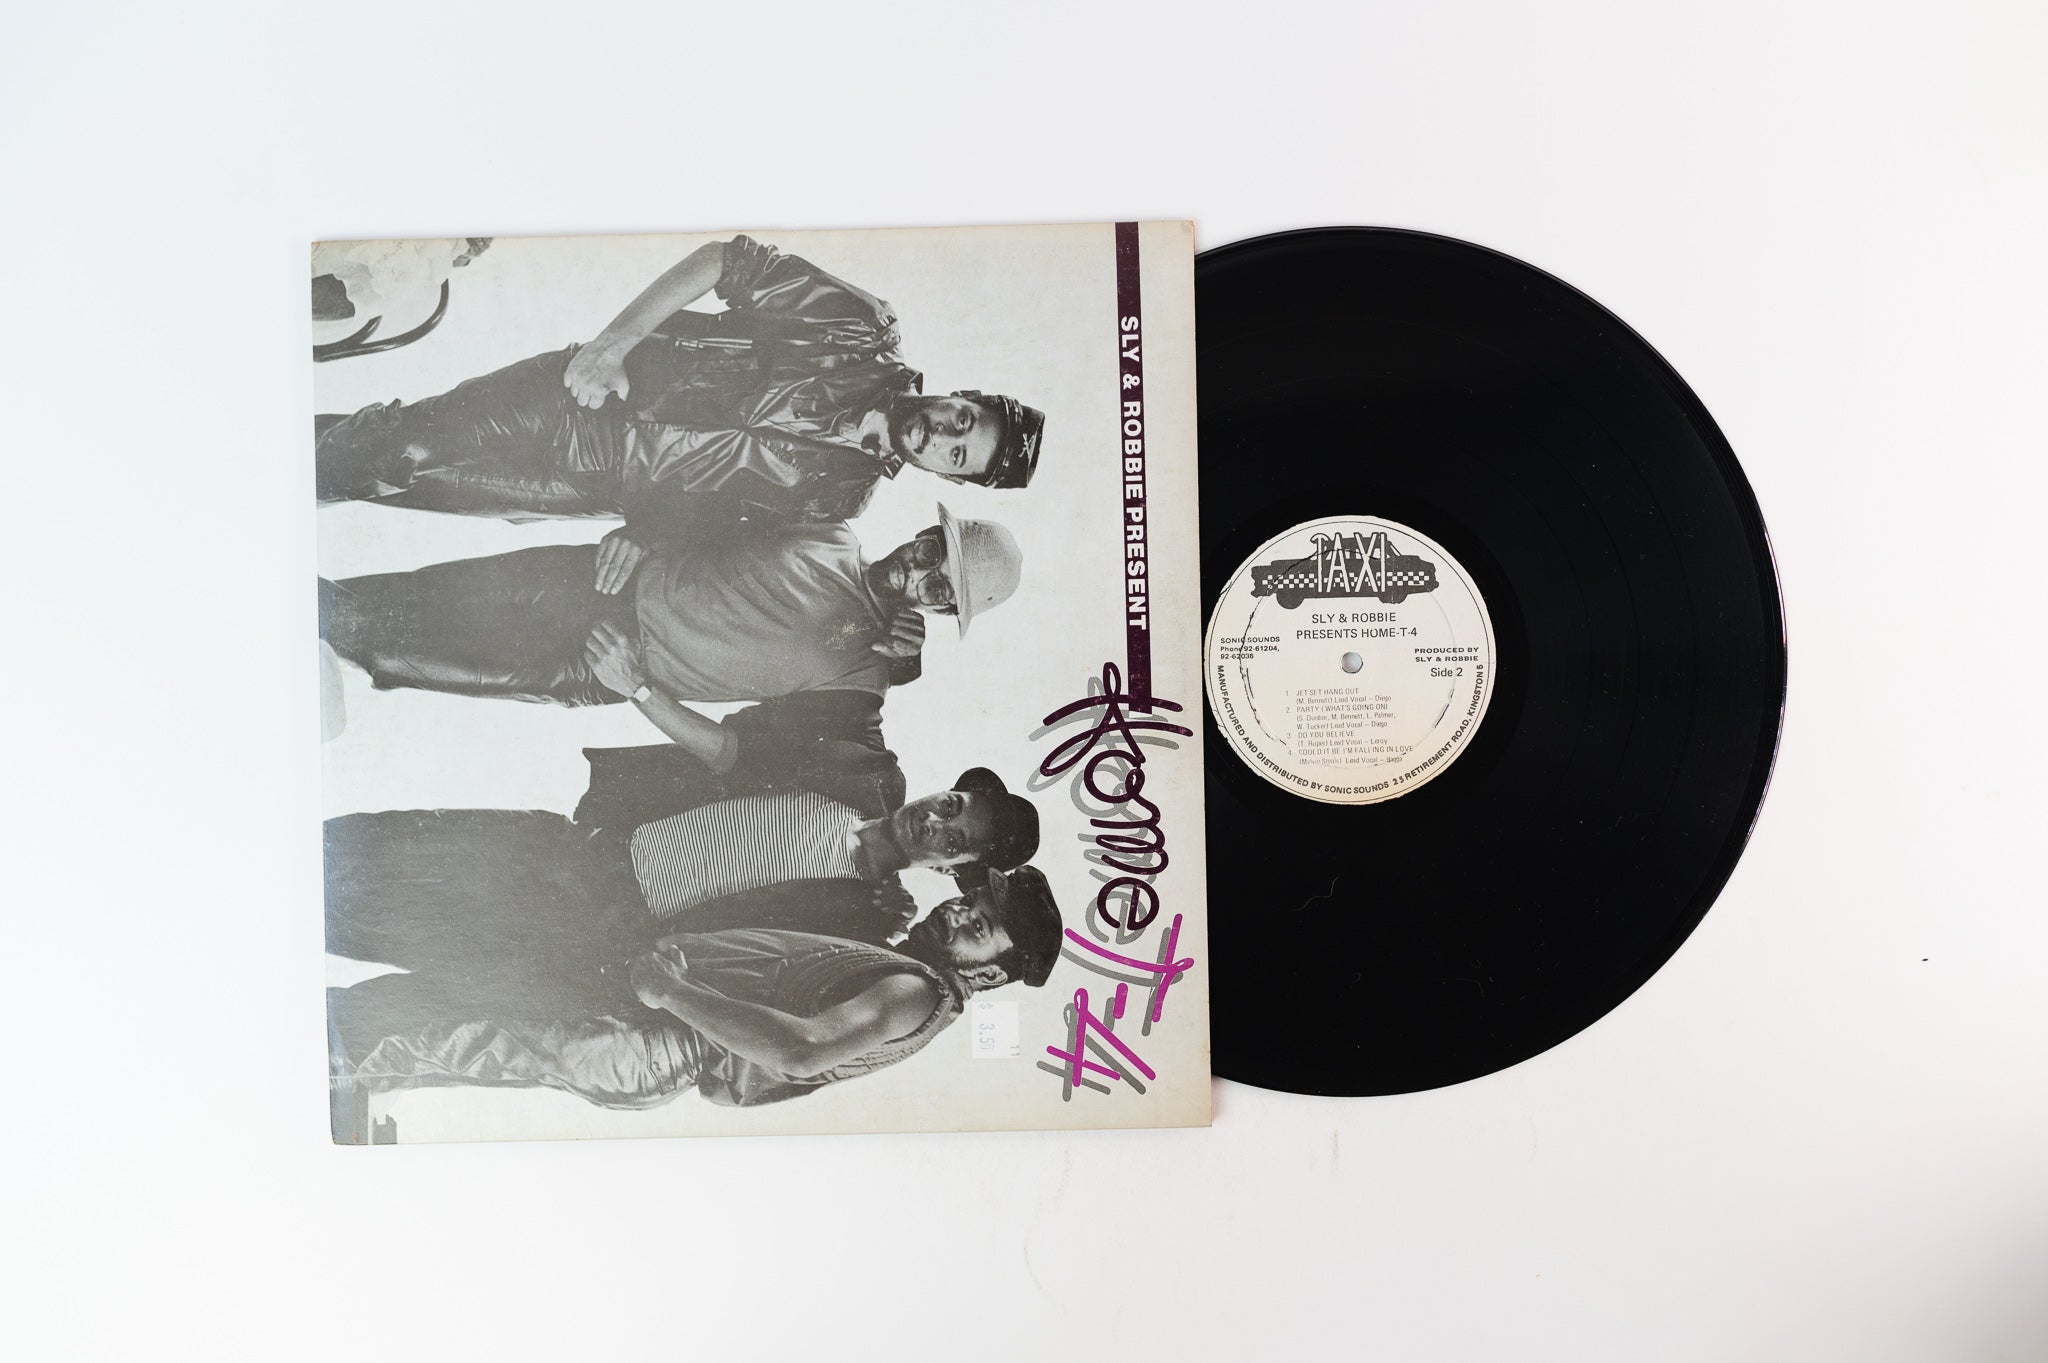 Home T-4 - Sly & Robbie Present Home T-4 on Taxi Jamaican Pressing